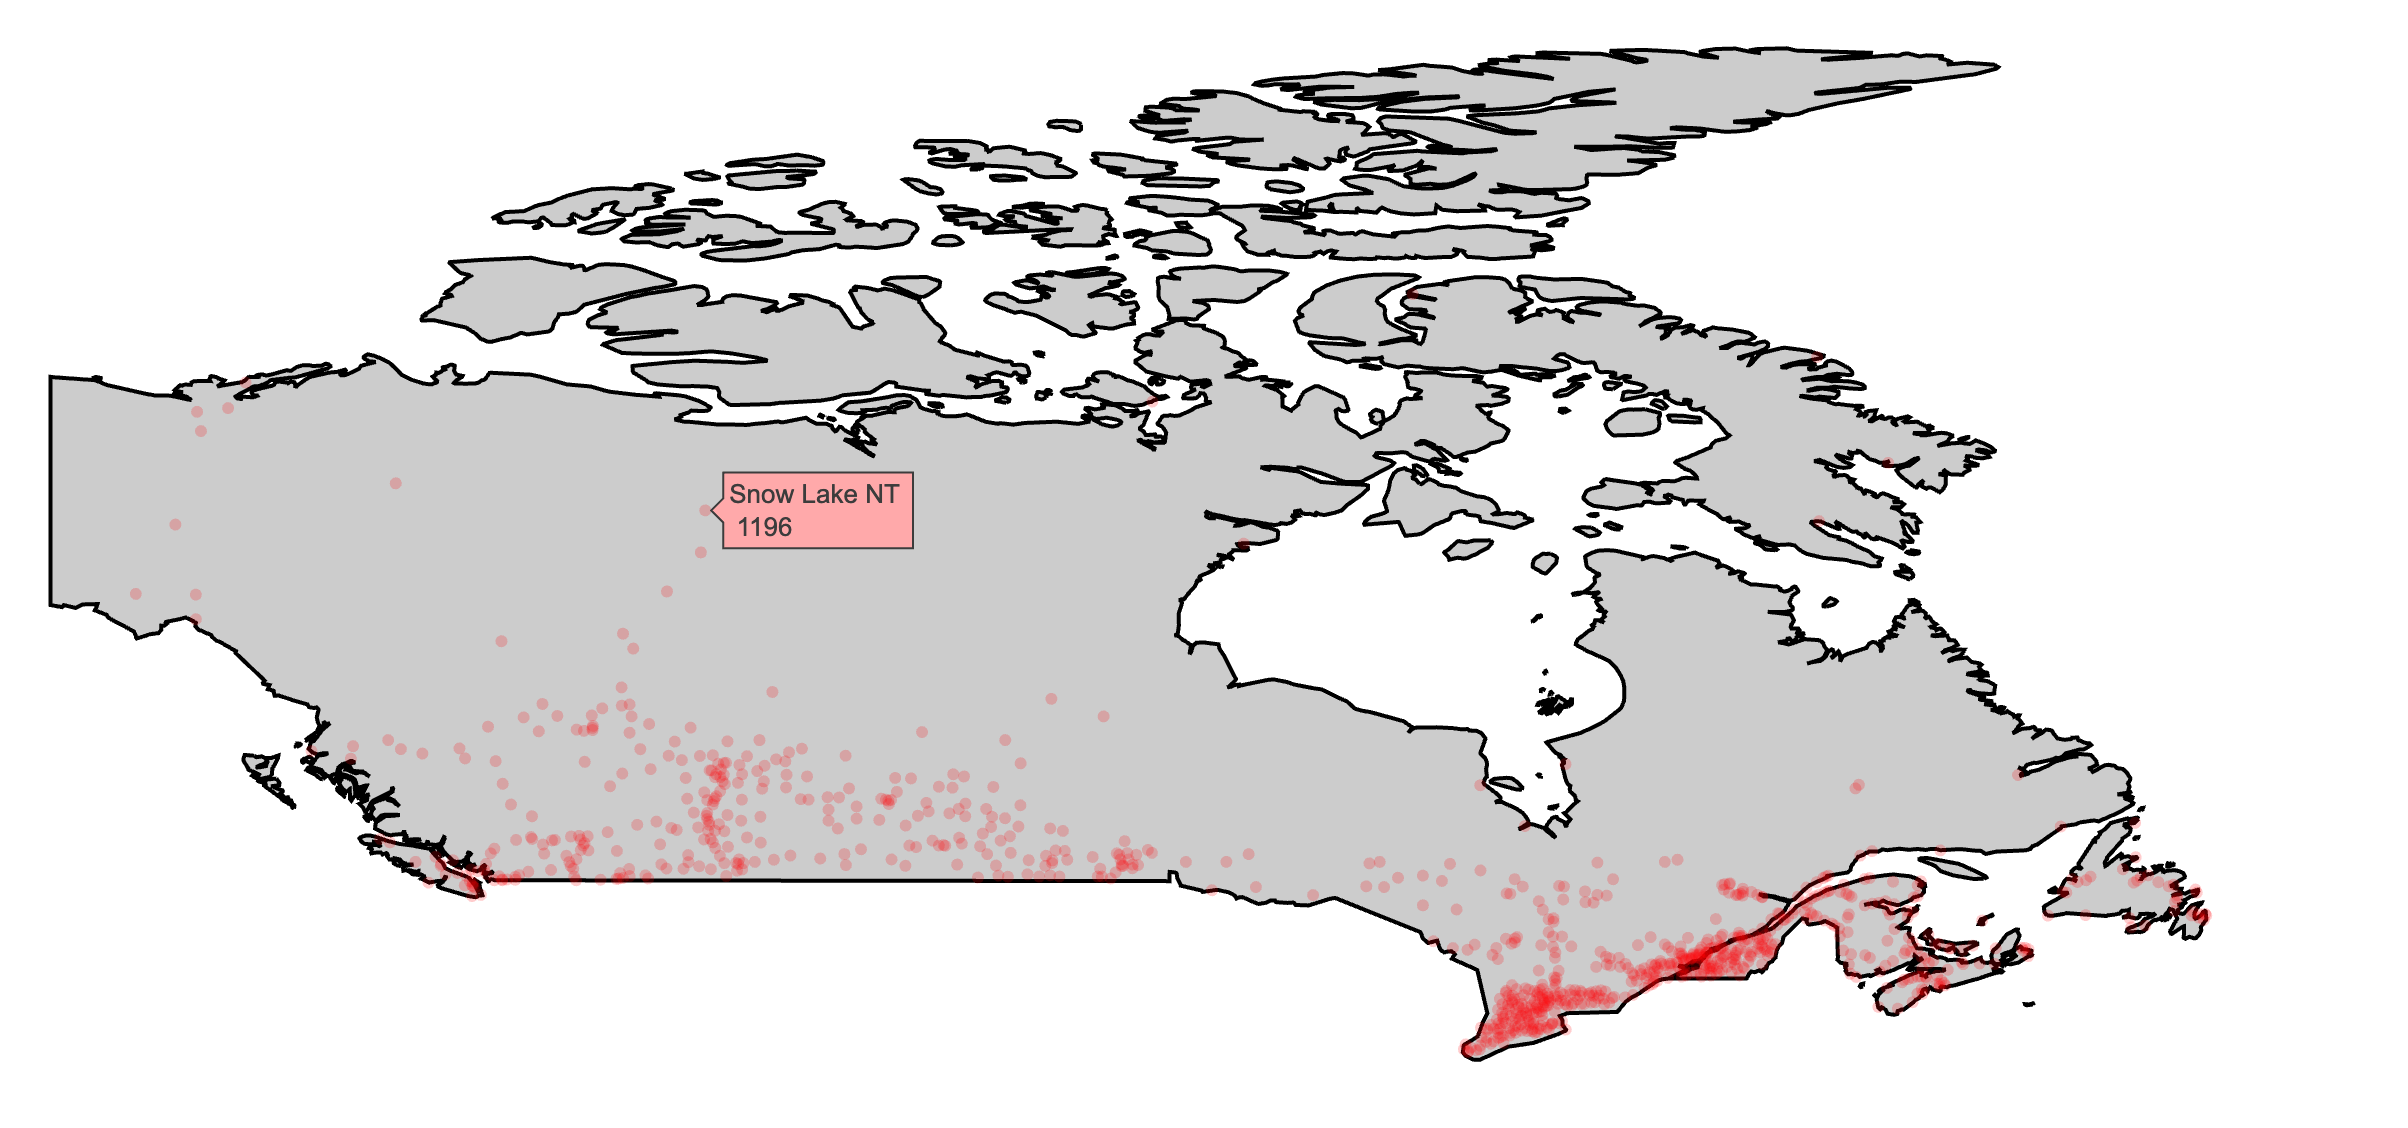 Using add_polygons() to make a map of Canada and major Canadian cities via data provided by the maps package.